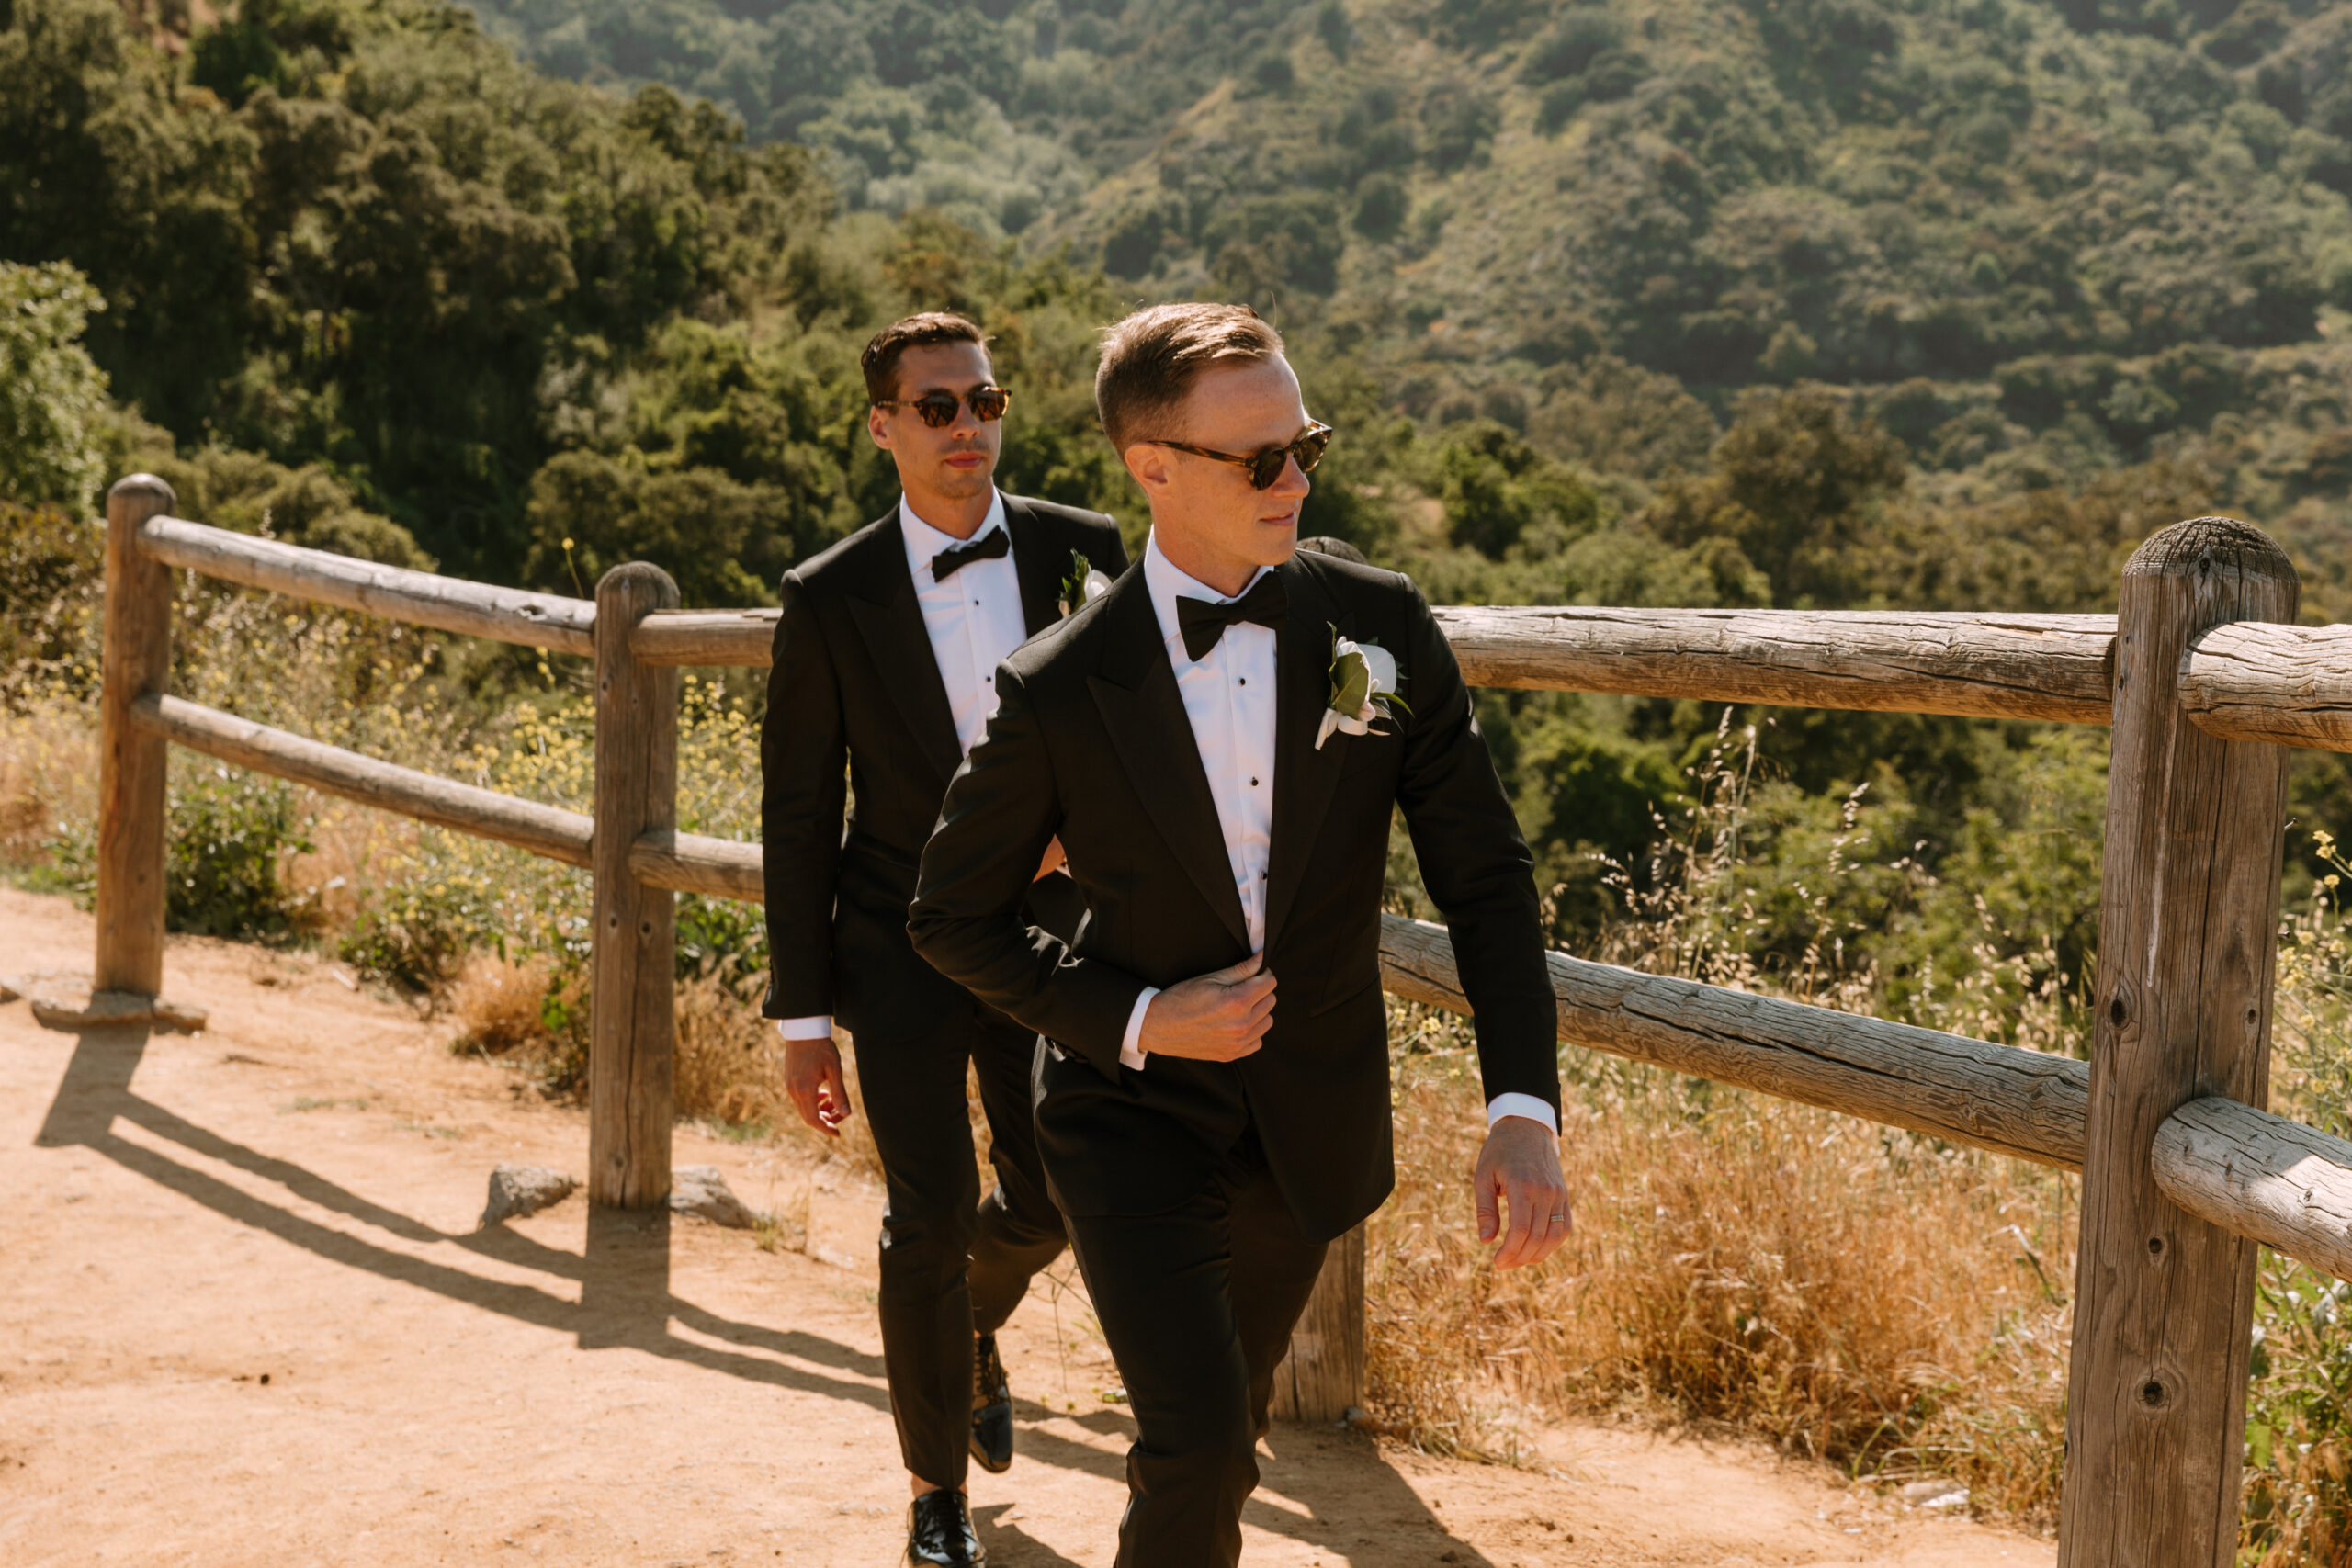 gay couple in tuxedos and sunglasses walks along railing near Mulholland Drive